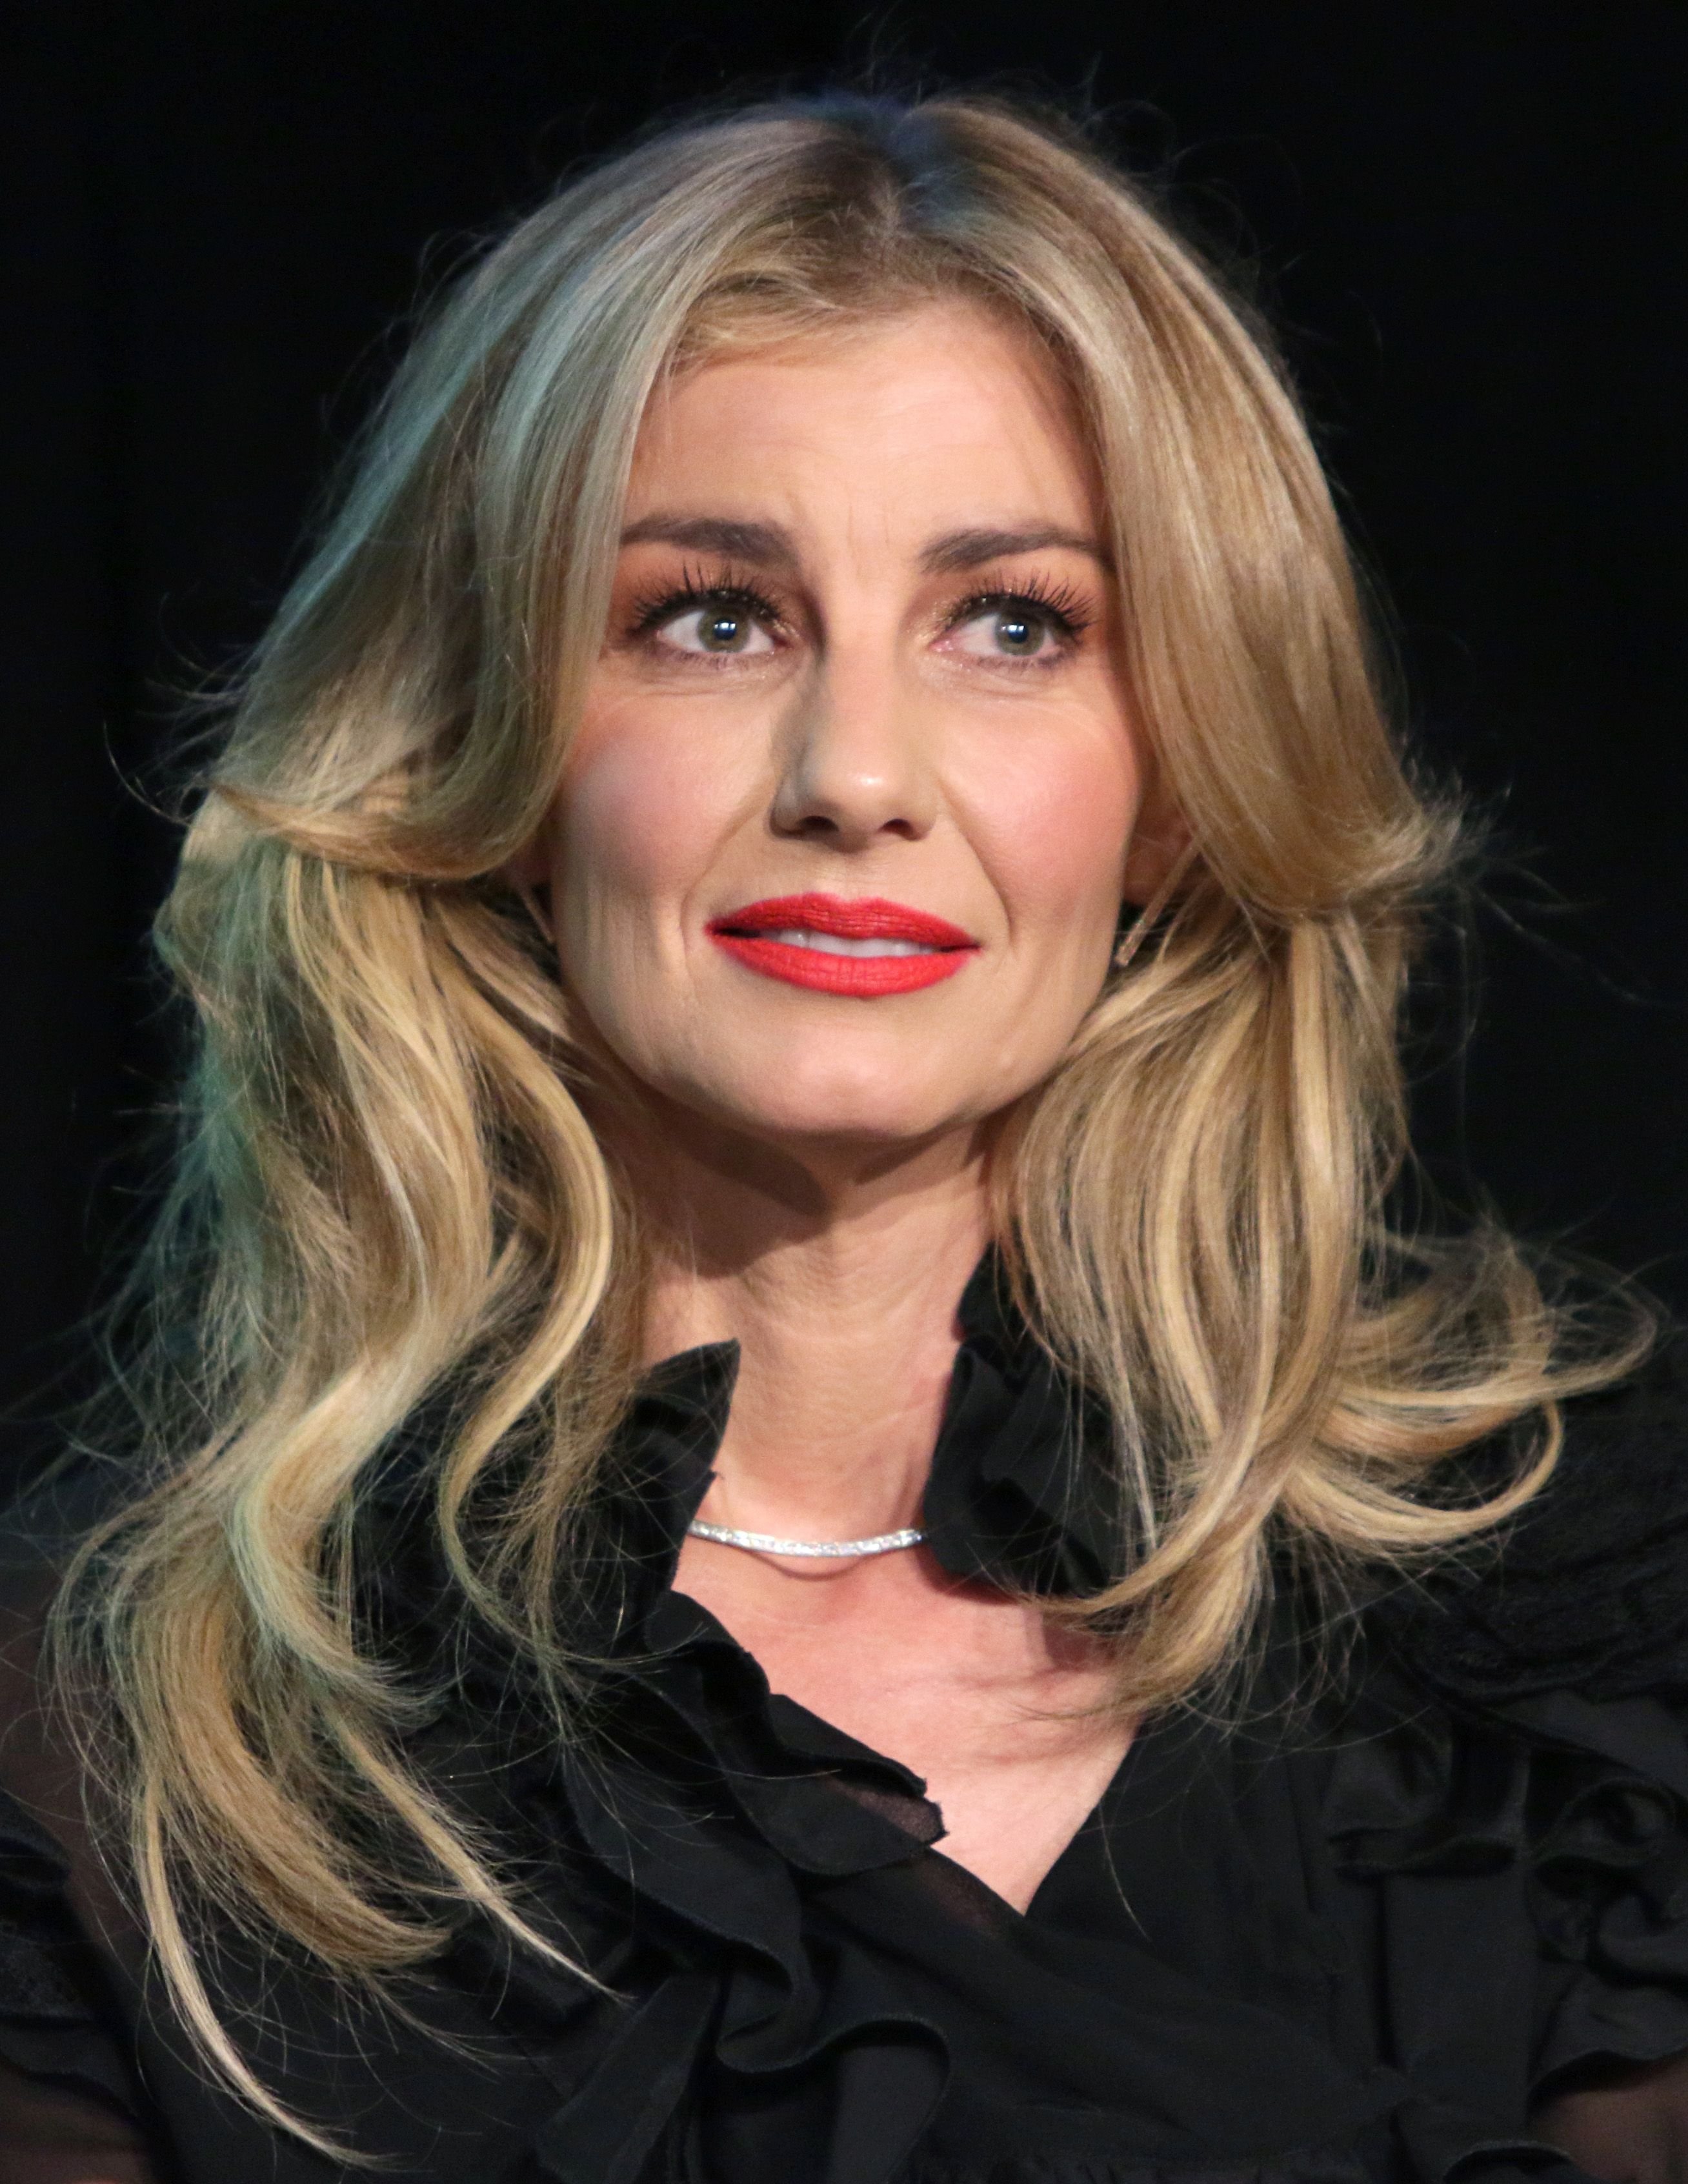 Faith Hill during the Billboard Touring Conference - Legends of Live: Tim McGraw and Faith Hill on November 14, 2017, in Beverly Hills, California | Photo: Jerritt Clark/Getty Images